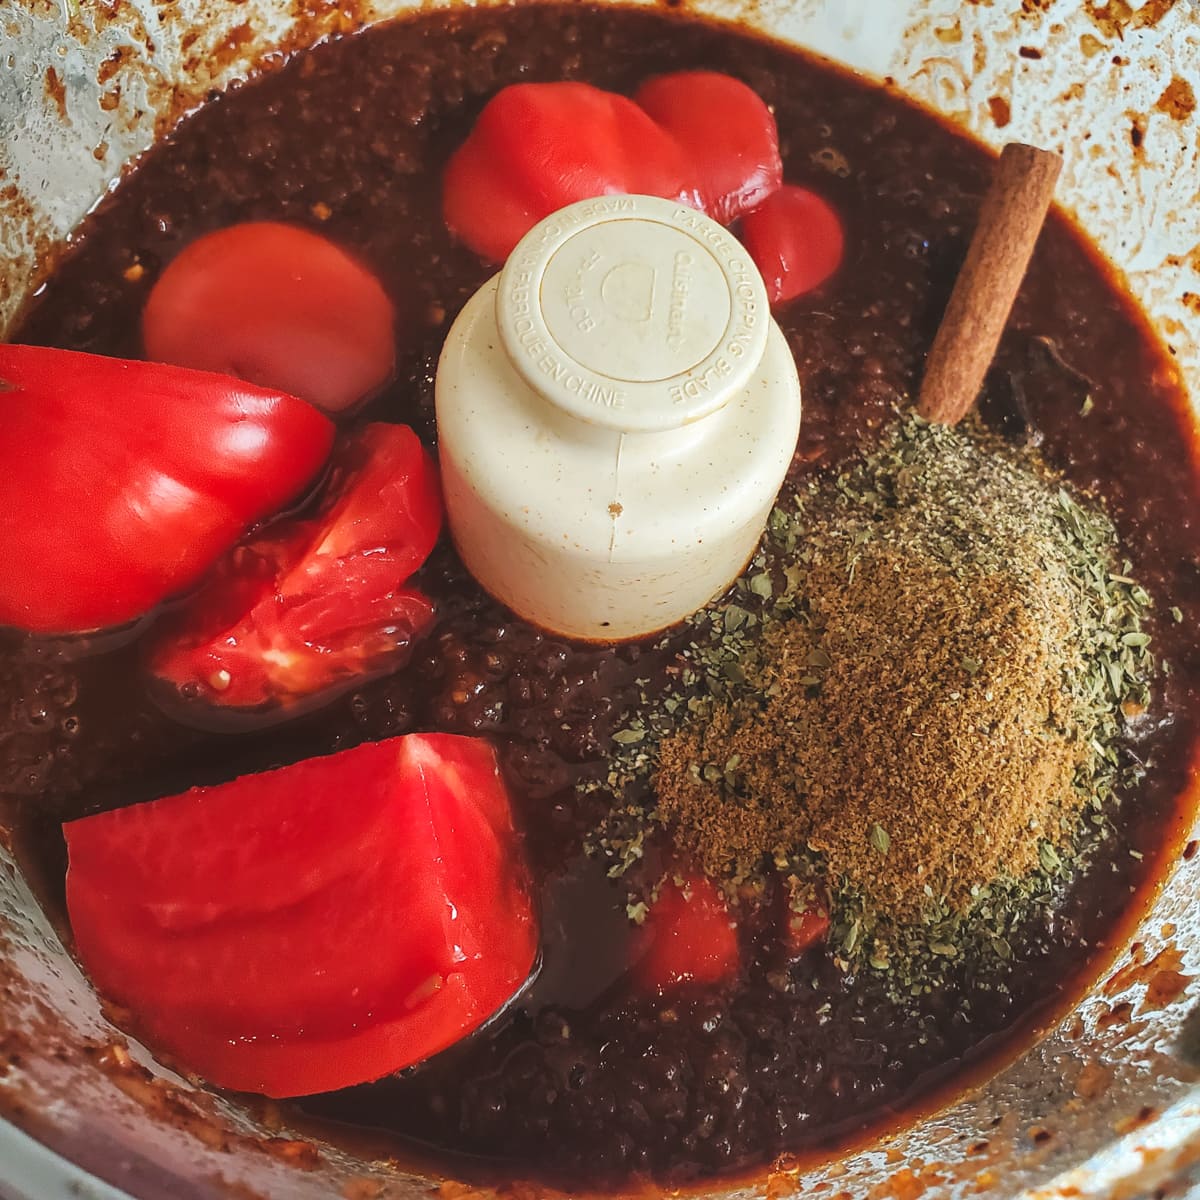 Tomatoes and spices added to a sauce in a food processor.